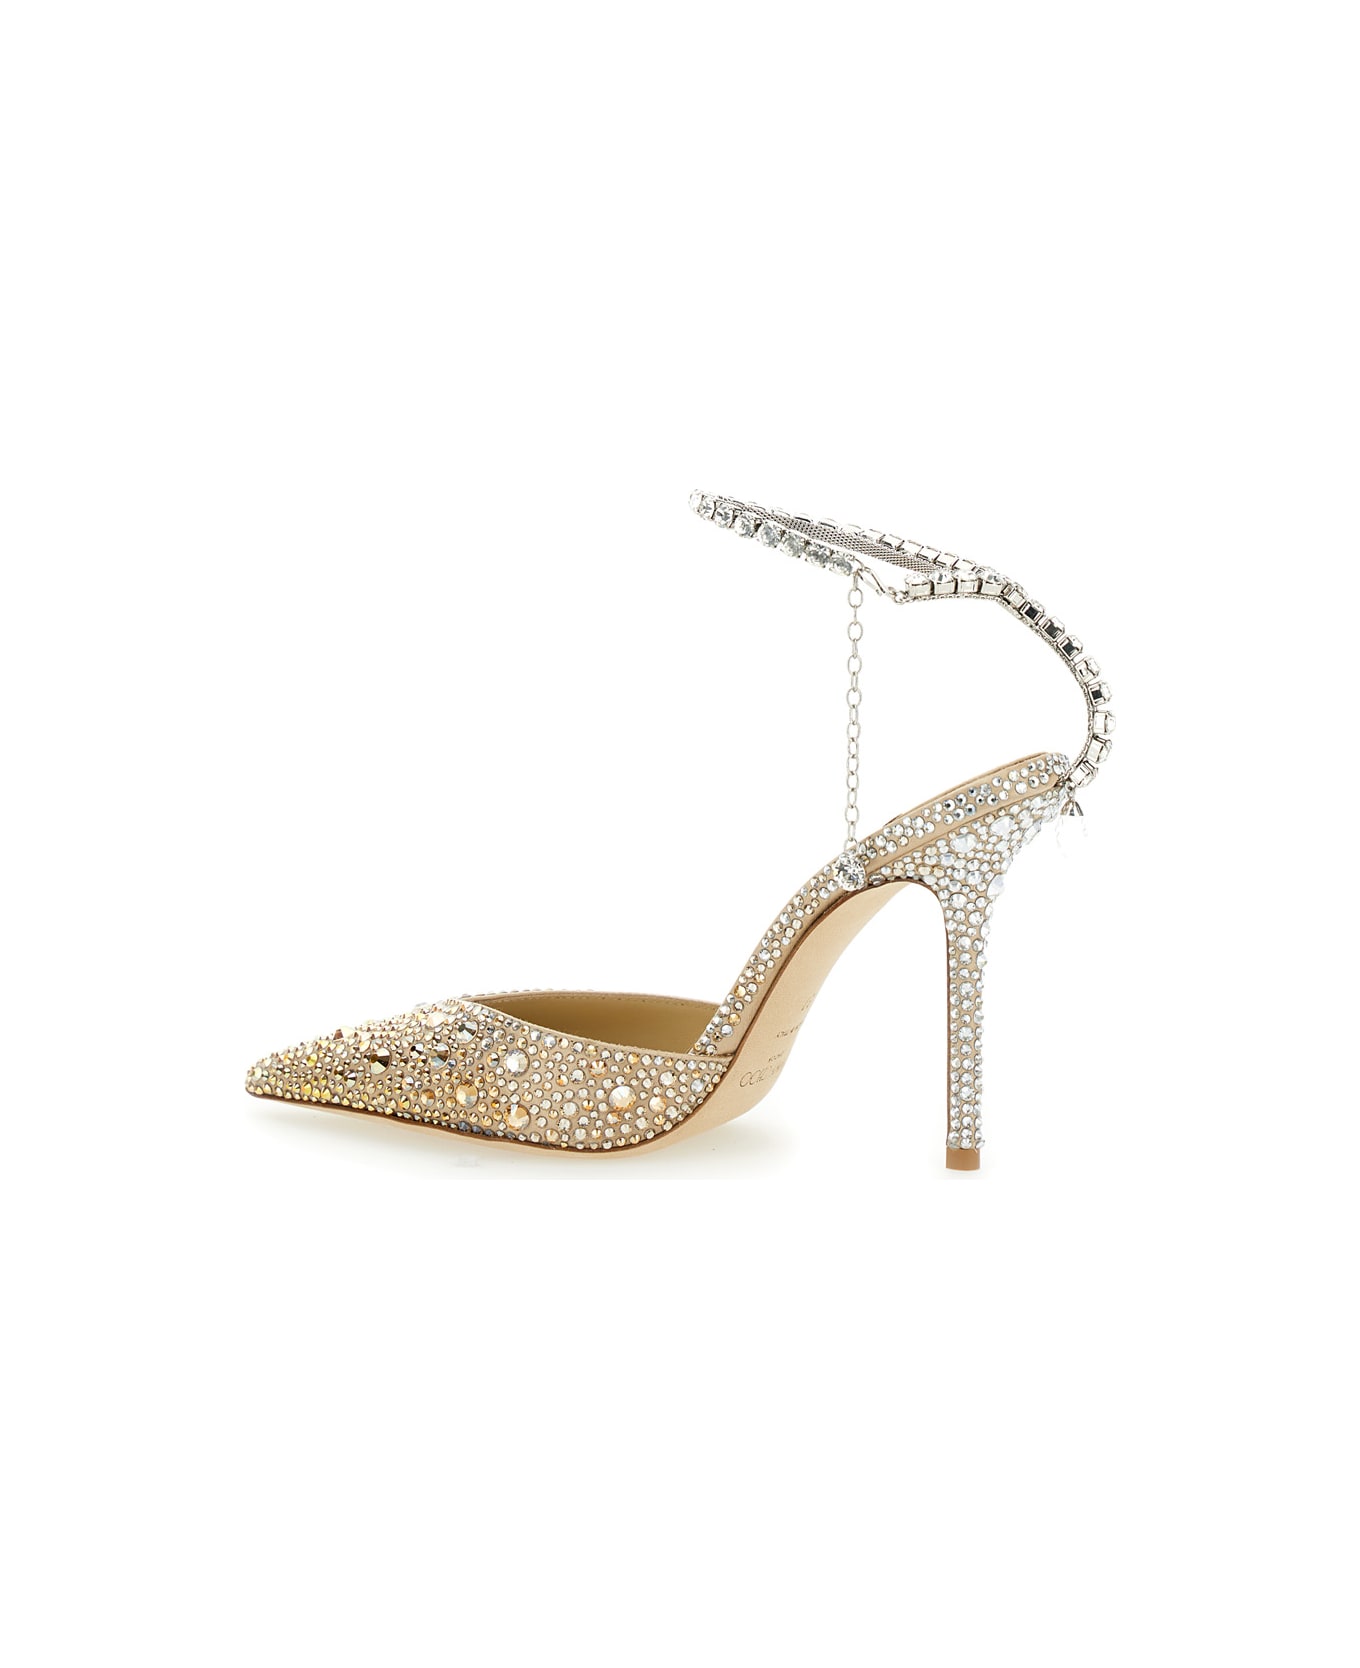 Jimmy Choo 'saeda 100' Gold Pumps With All-over Crystals In Satin Woman - Beige